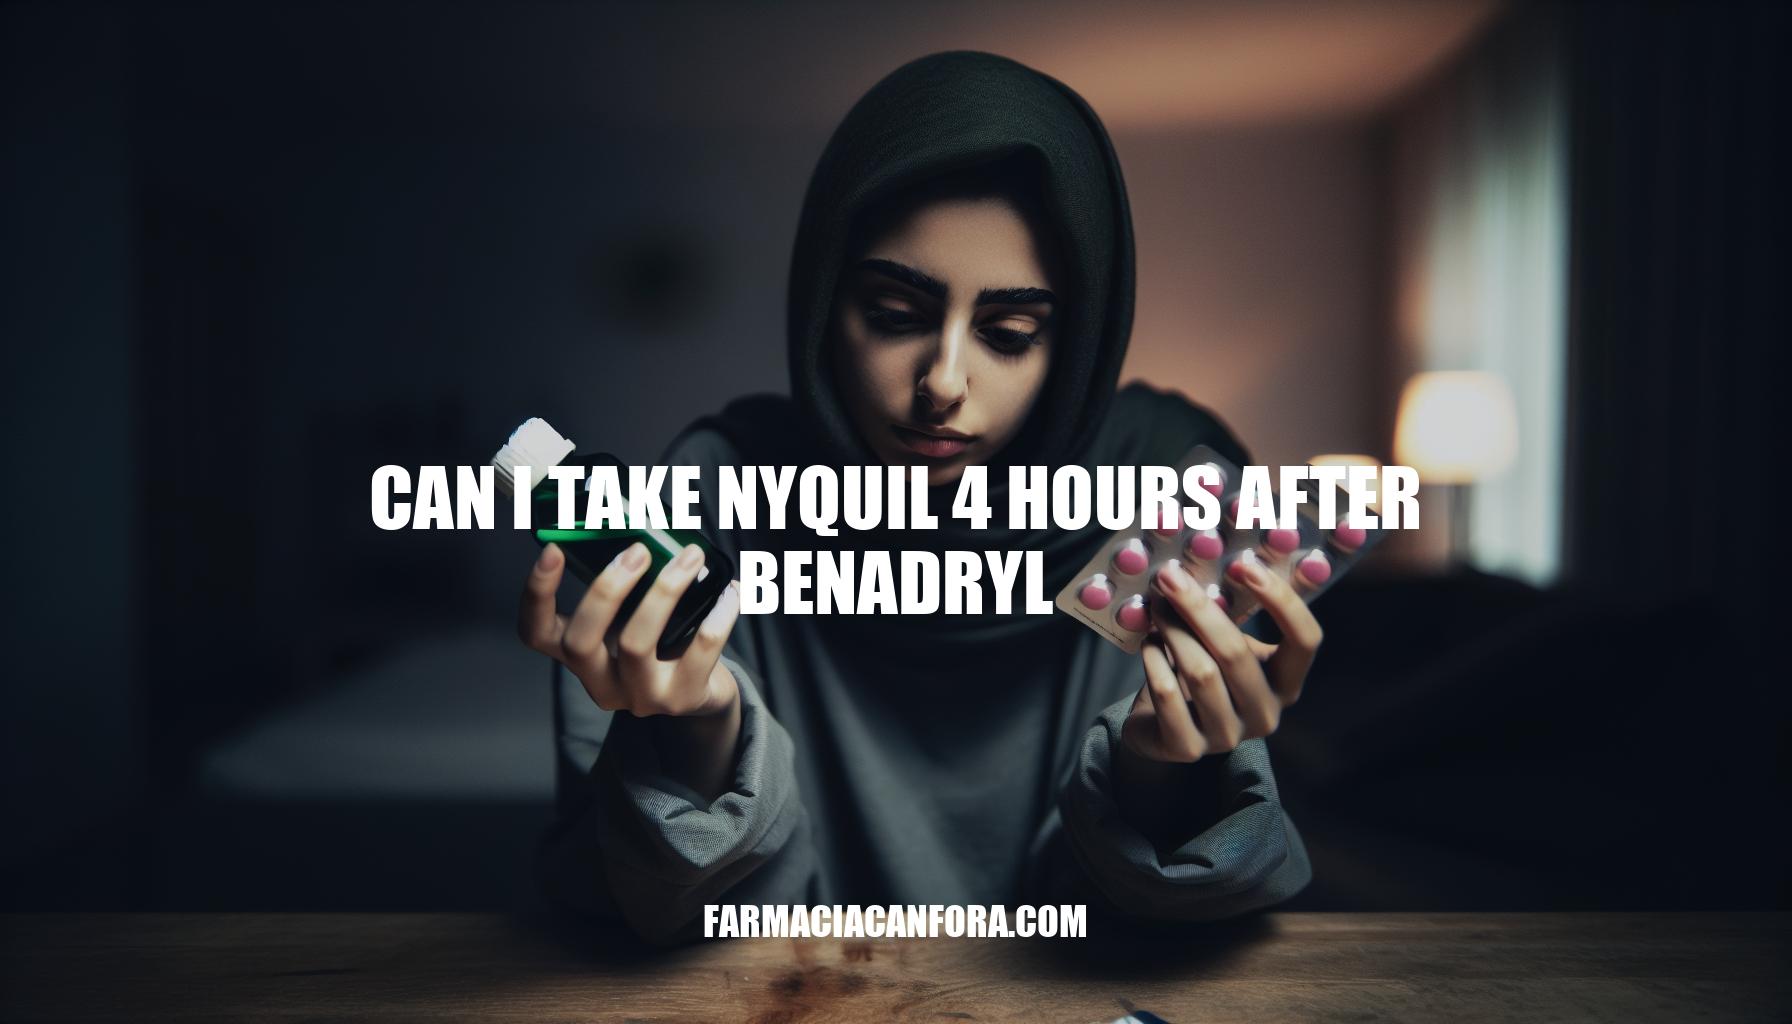 Can I Take Nyquil 4 Hours After Benadryl: Safety Guide